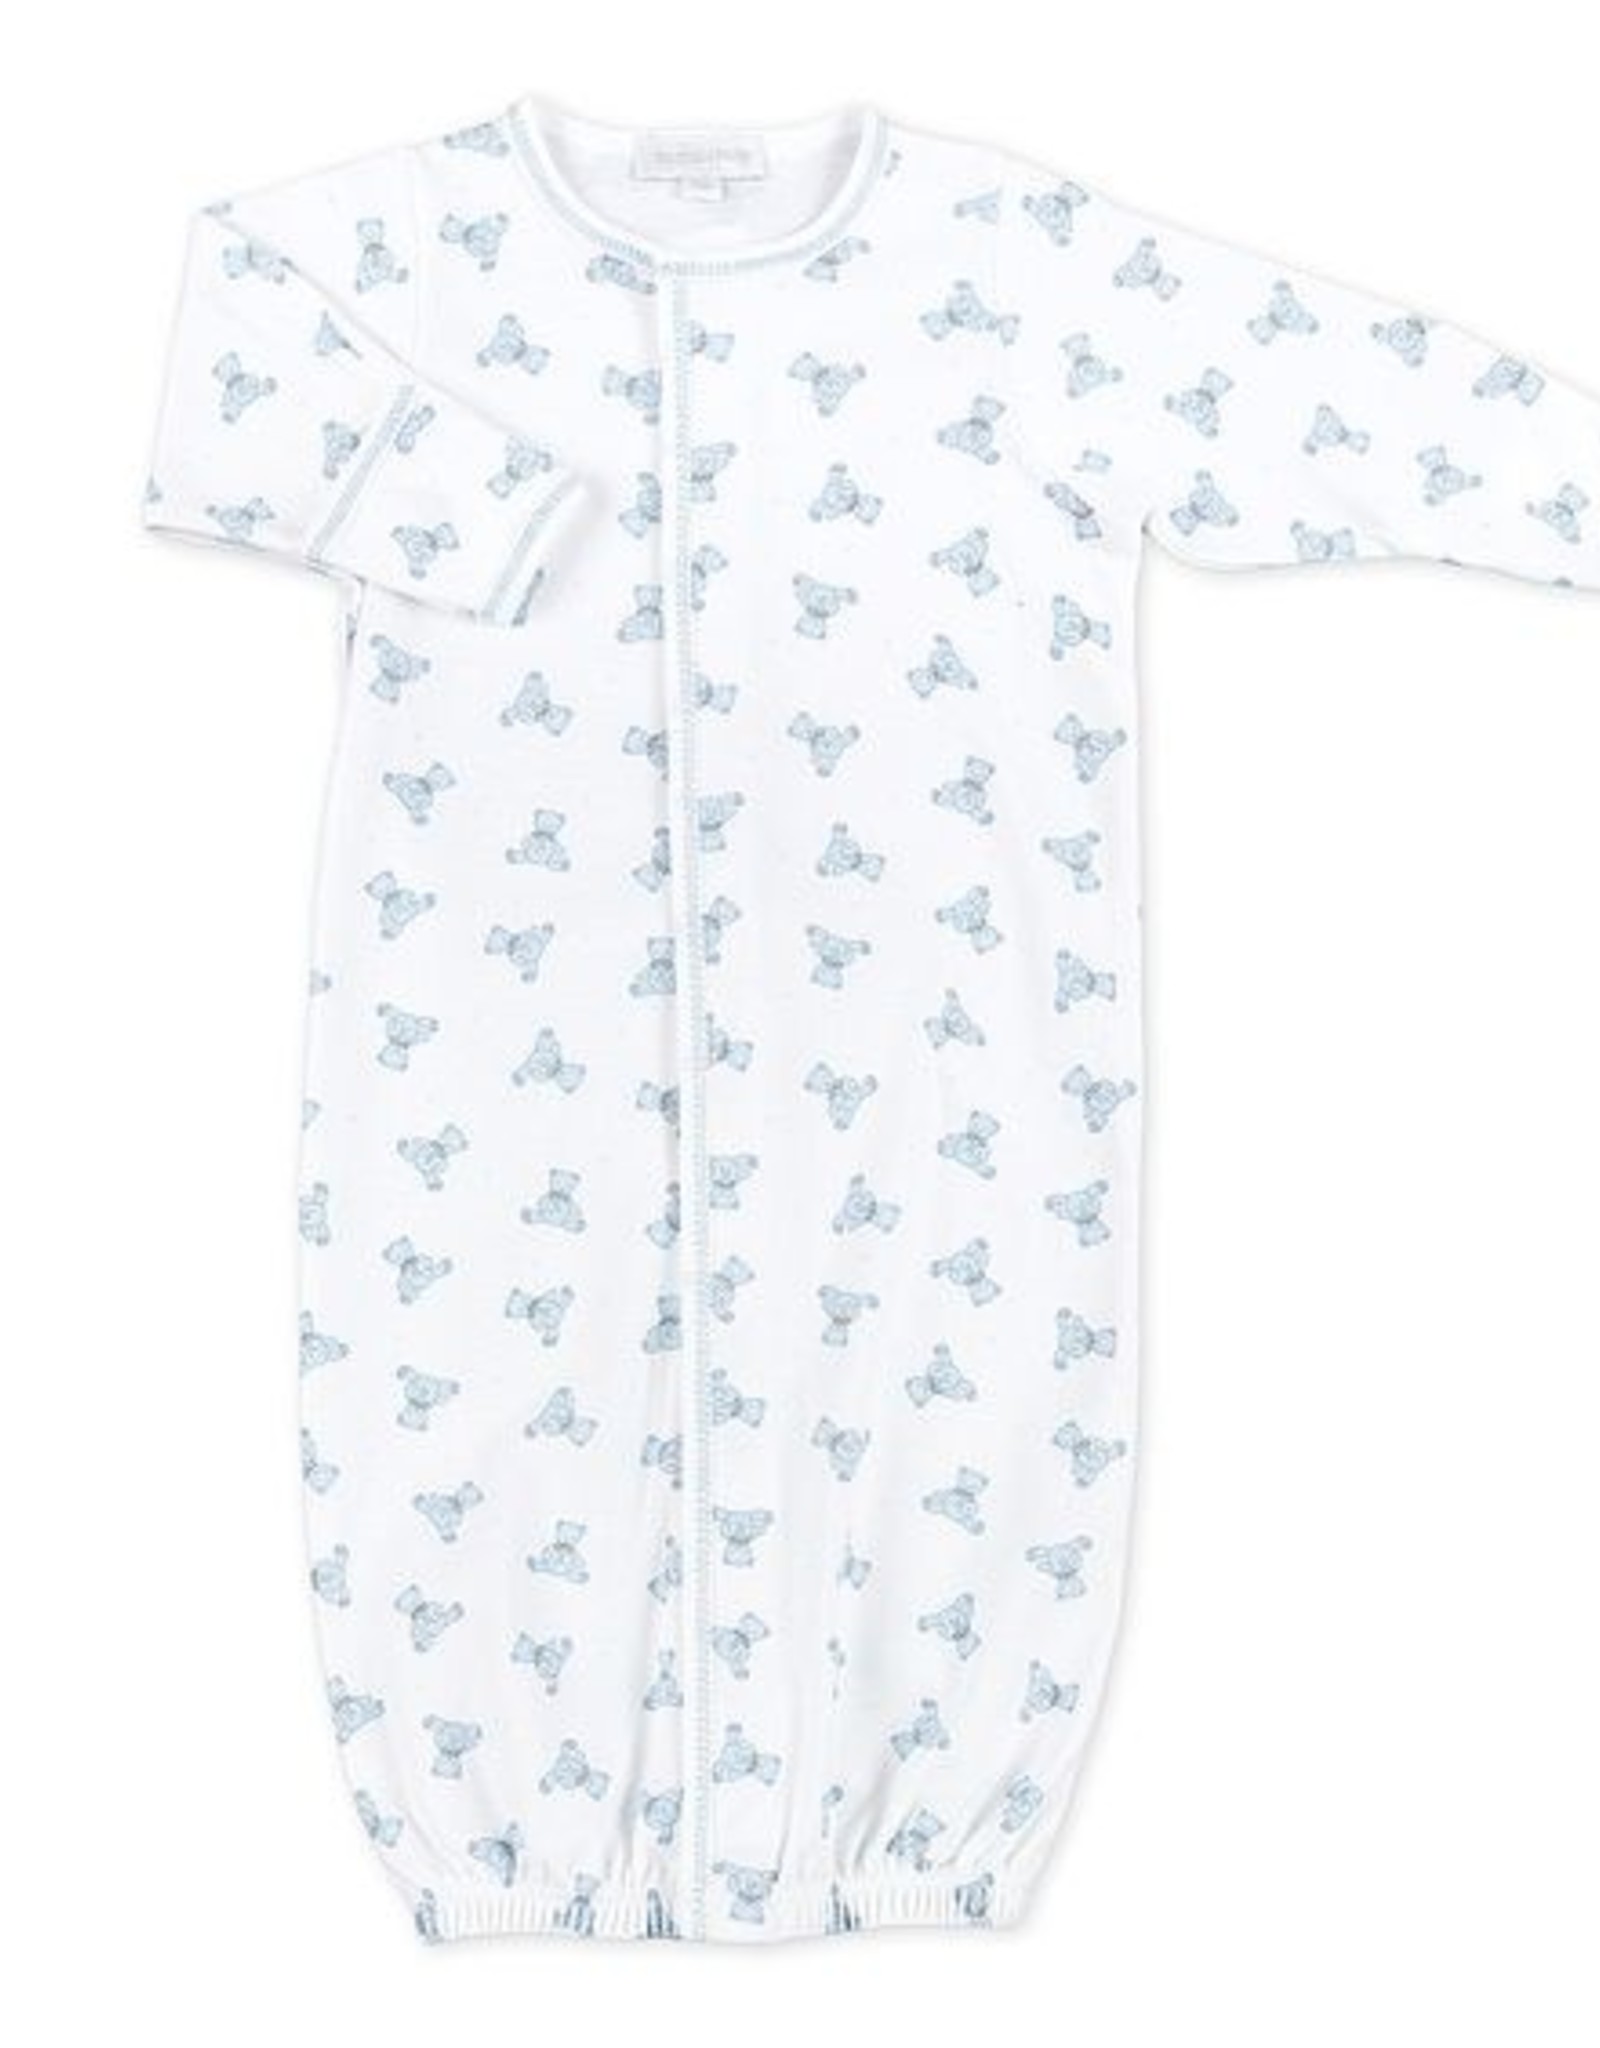 Magnolia Baby Baby's Teddy Printed Converter Gown